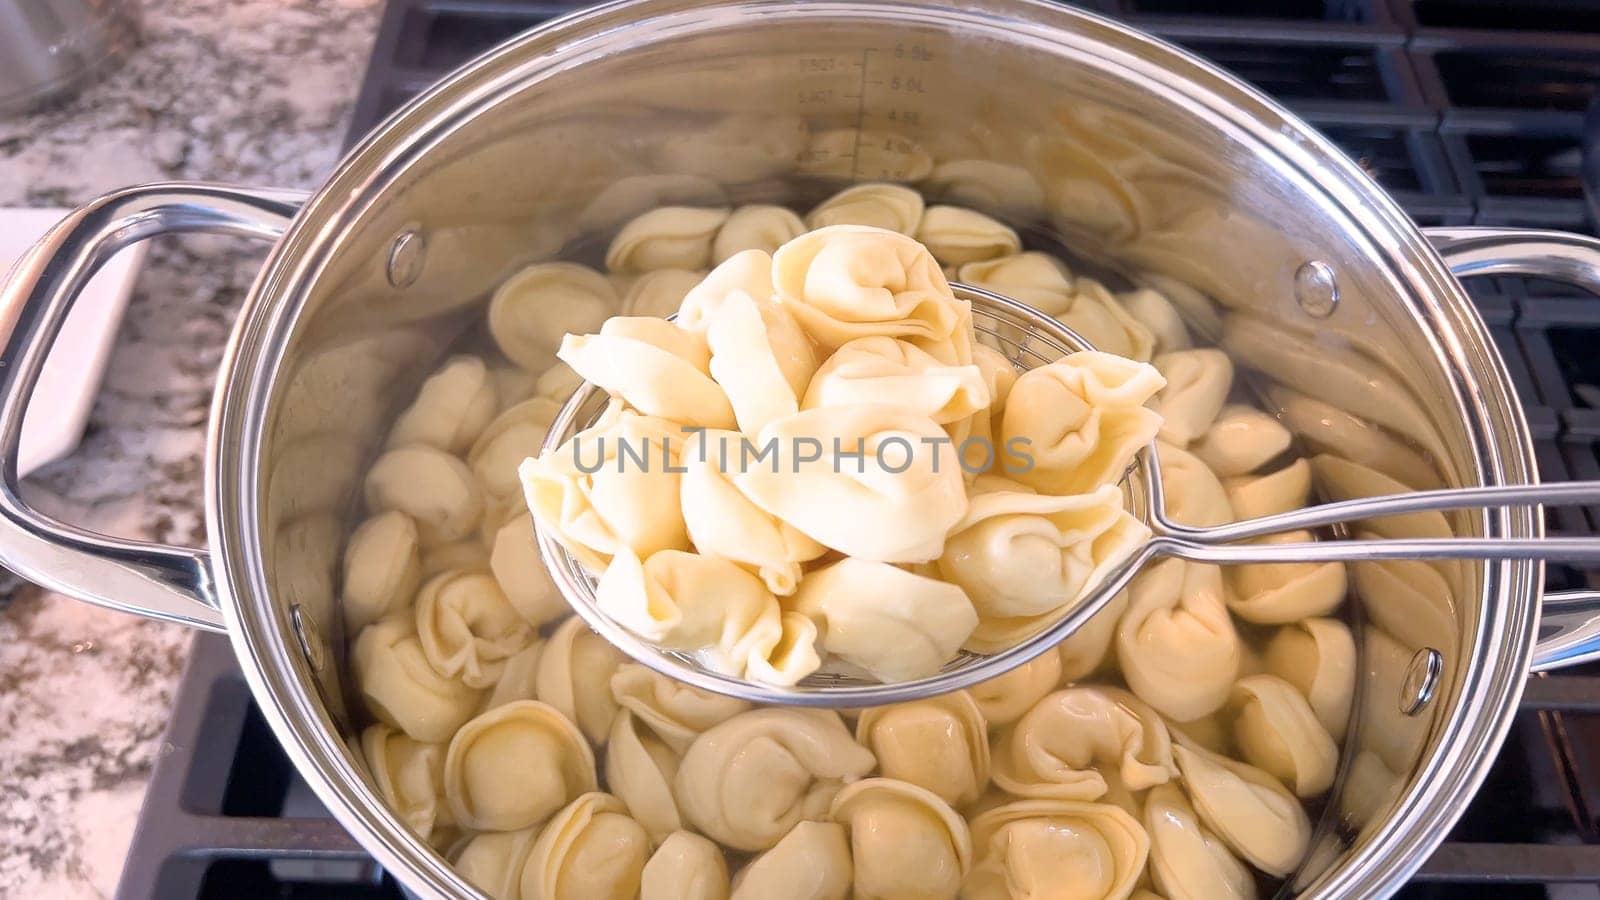 Cooking Tortellini Pasta in a Large Stainless Steel Pot by arinahabich